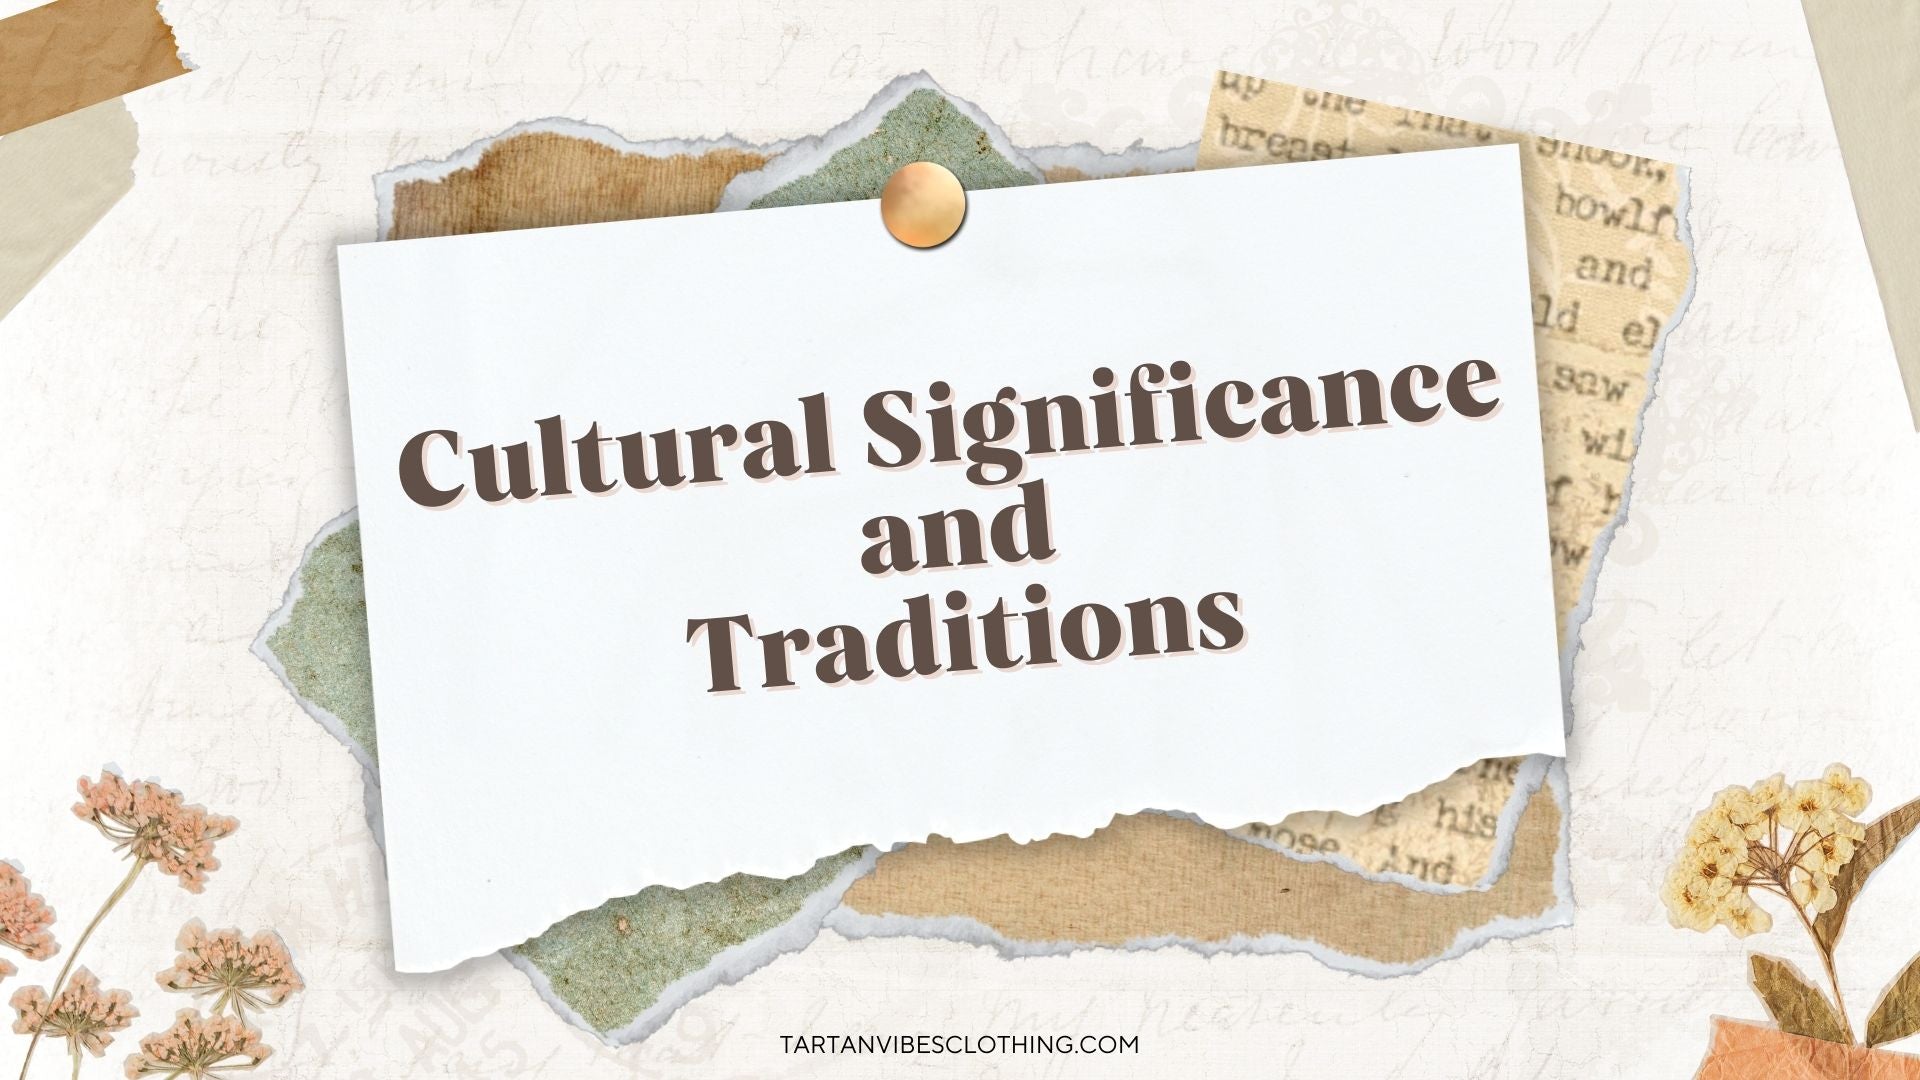 Cultural Significance and Traditions